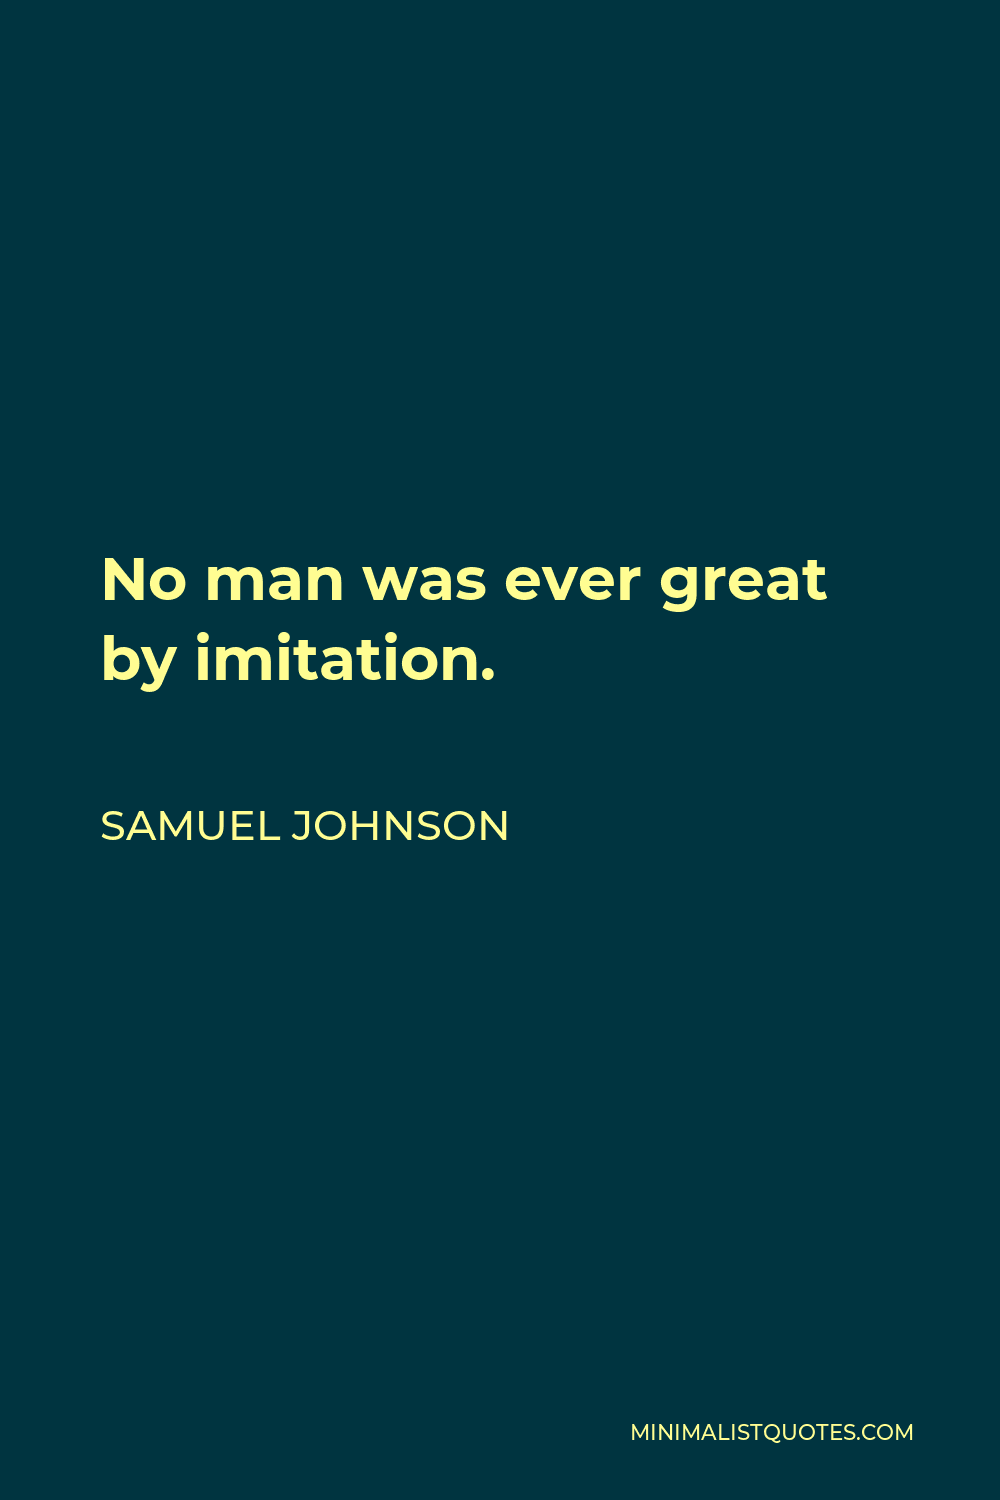 Samuel Johnson Quote - No man was ever great by imitation.